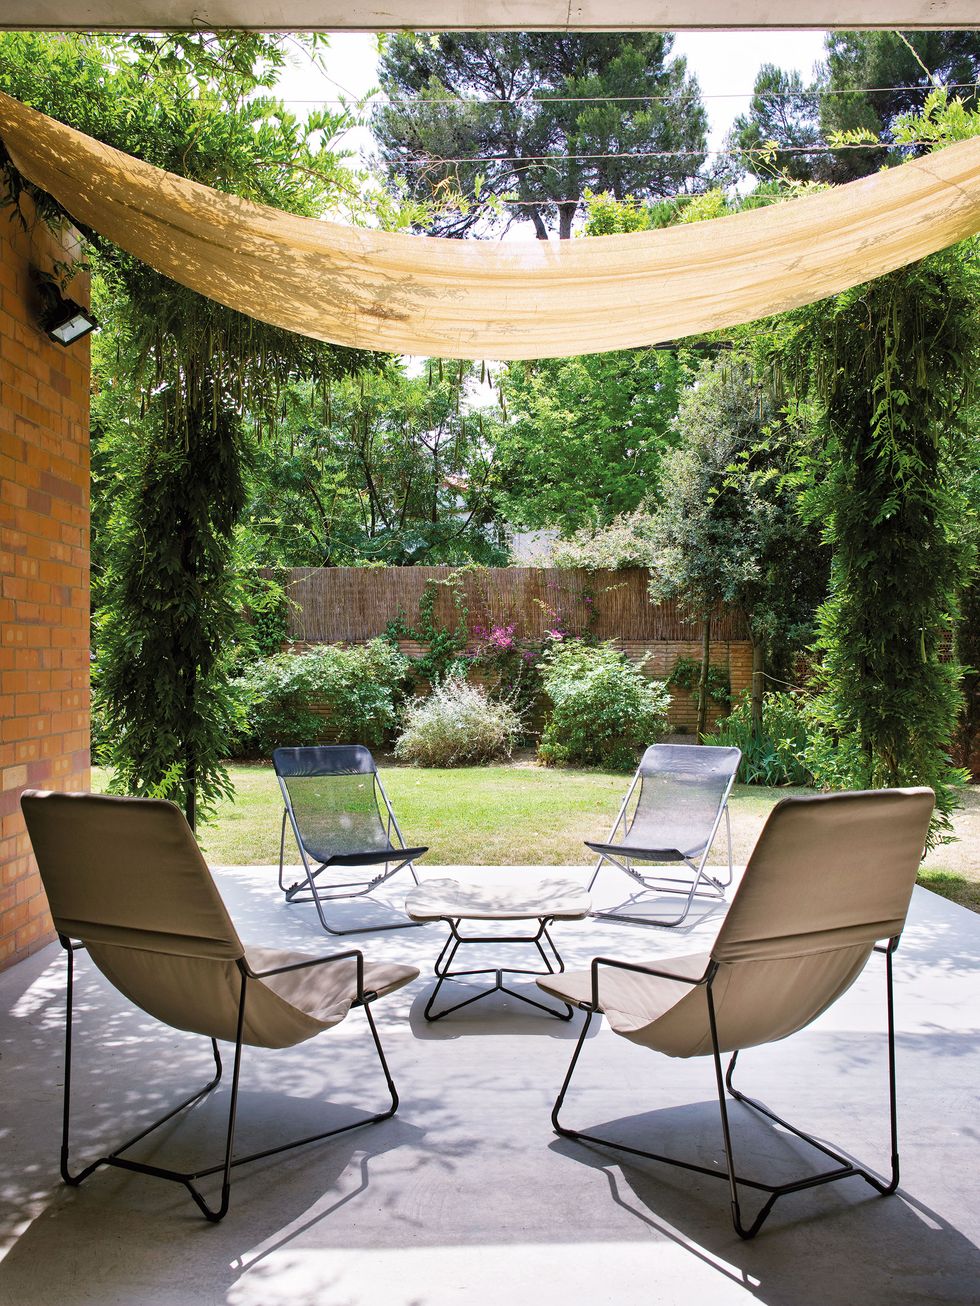 garden with seating area with sun loungers under an awning